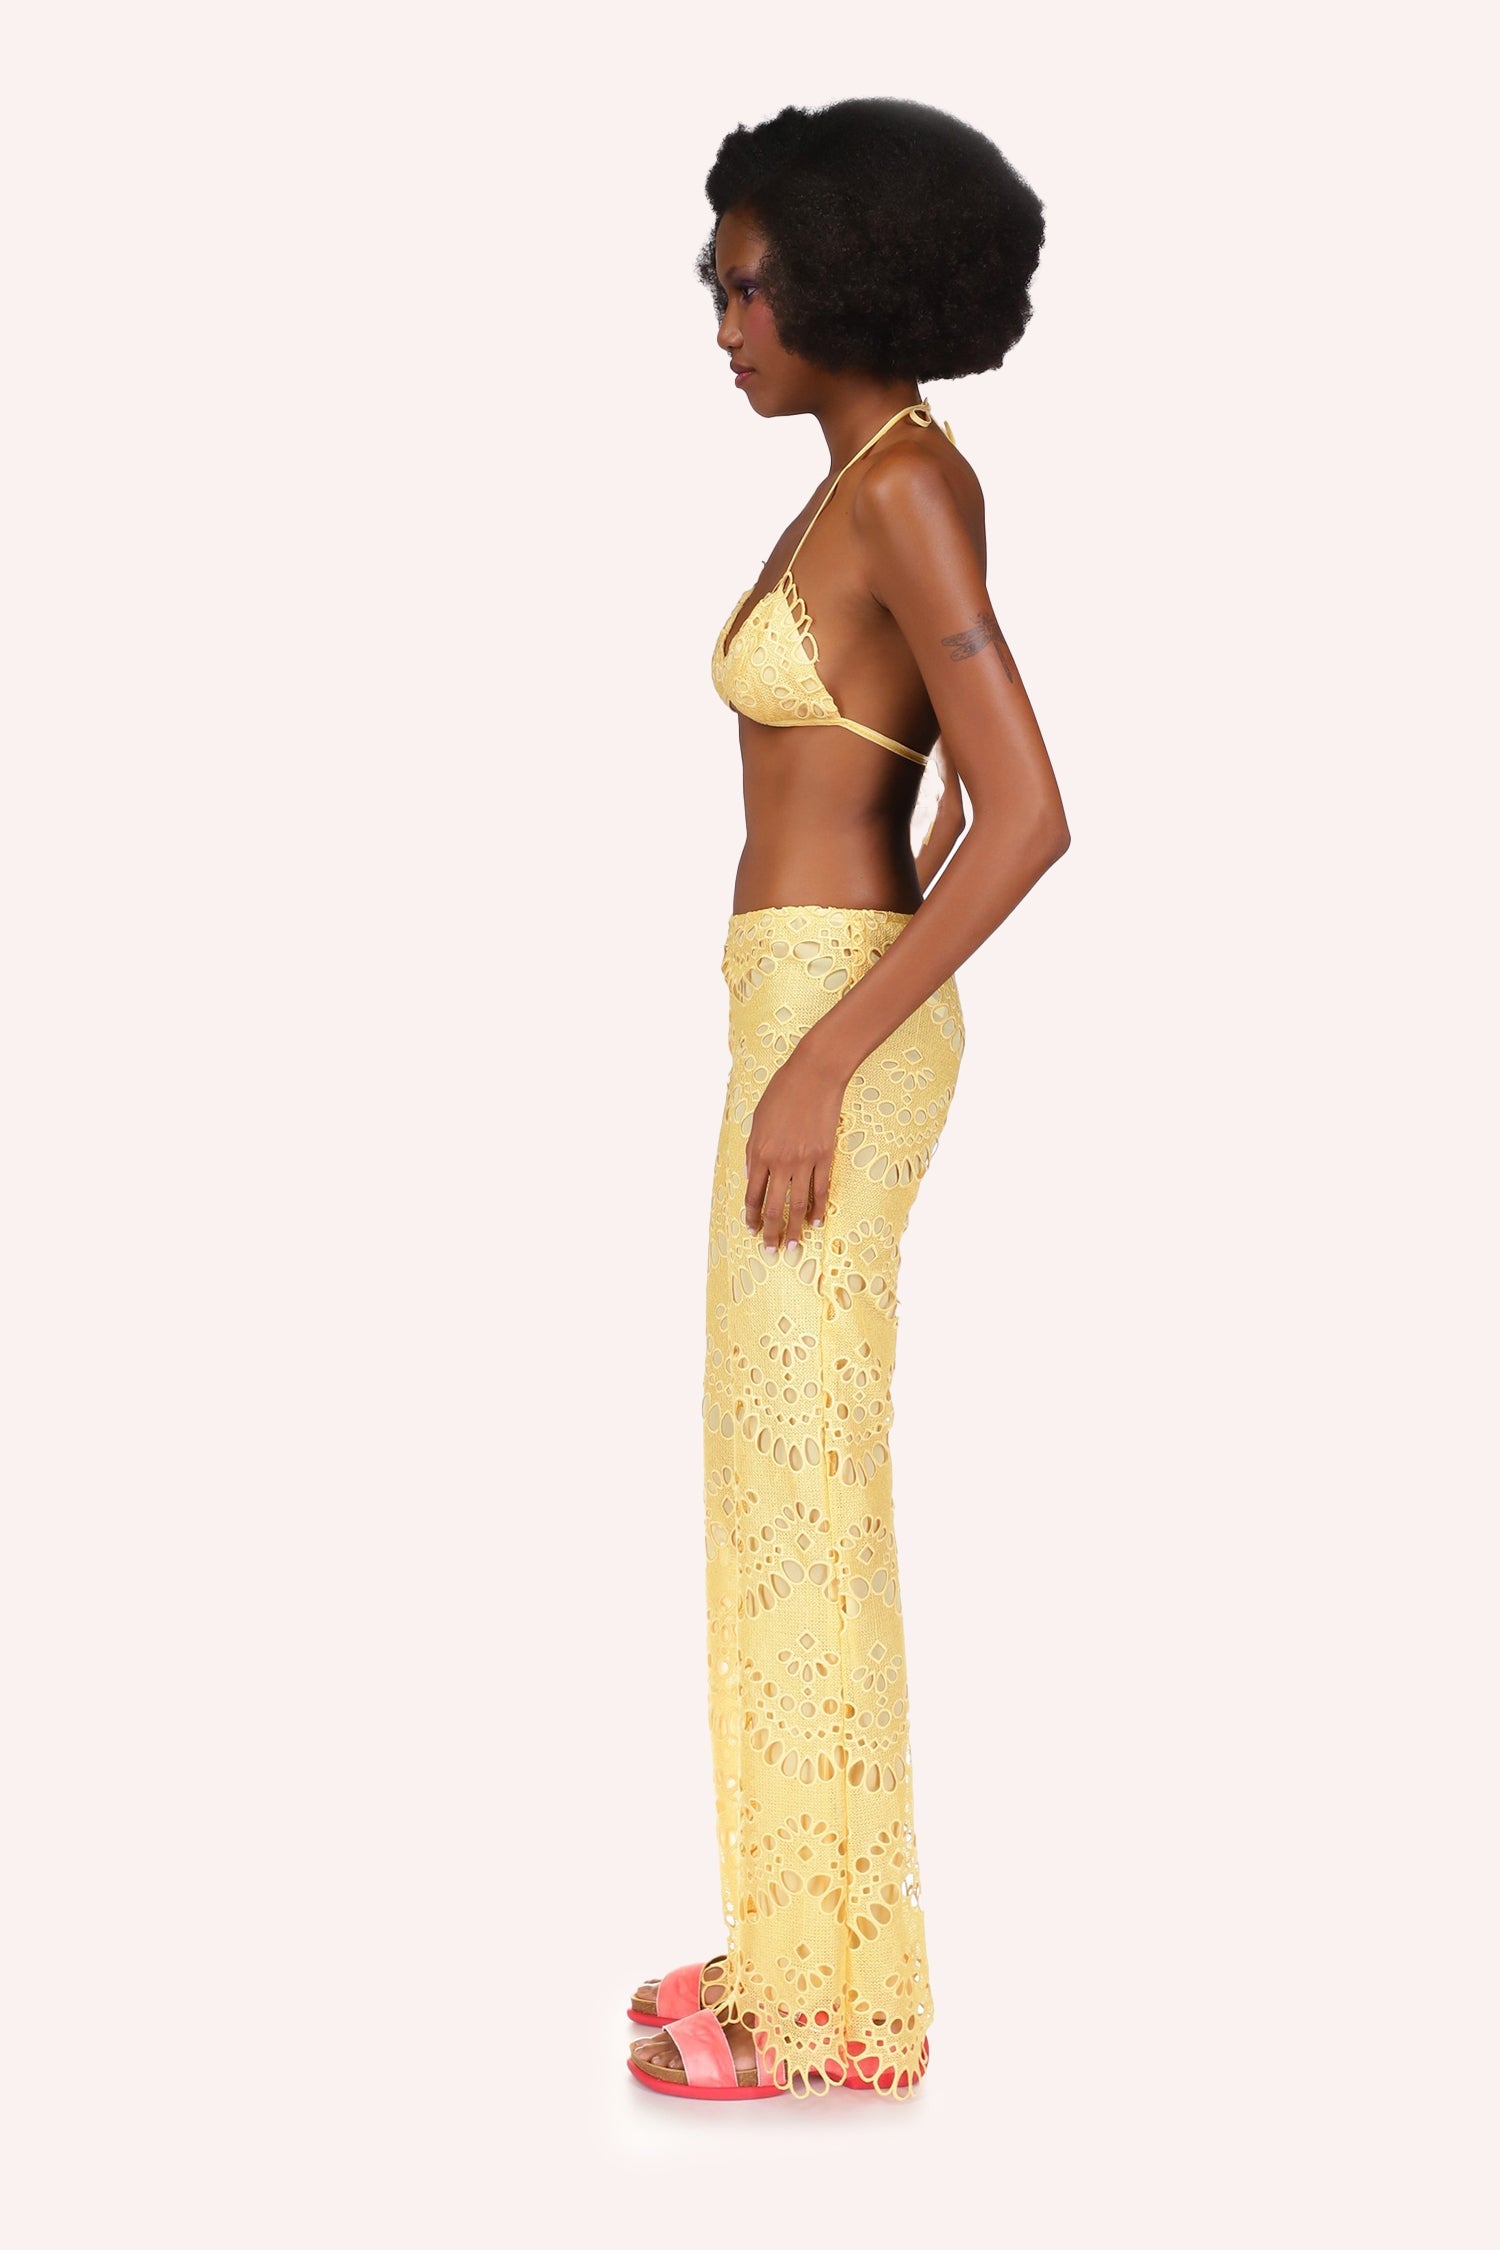 Eyelet Pants yellow with oval eyelets in a round shaped alignment, form-fitting on top